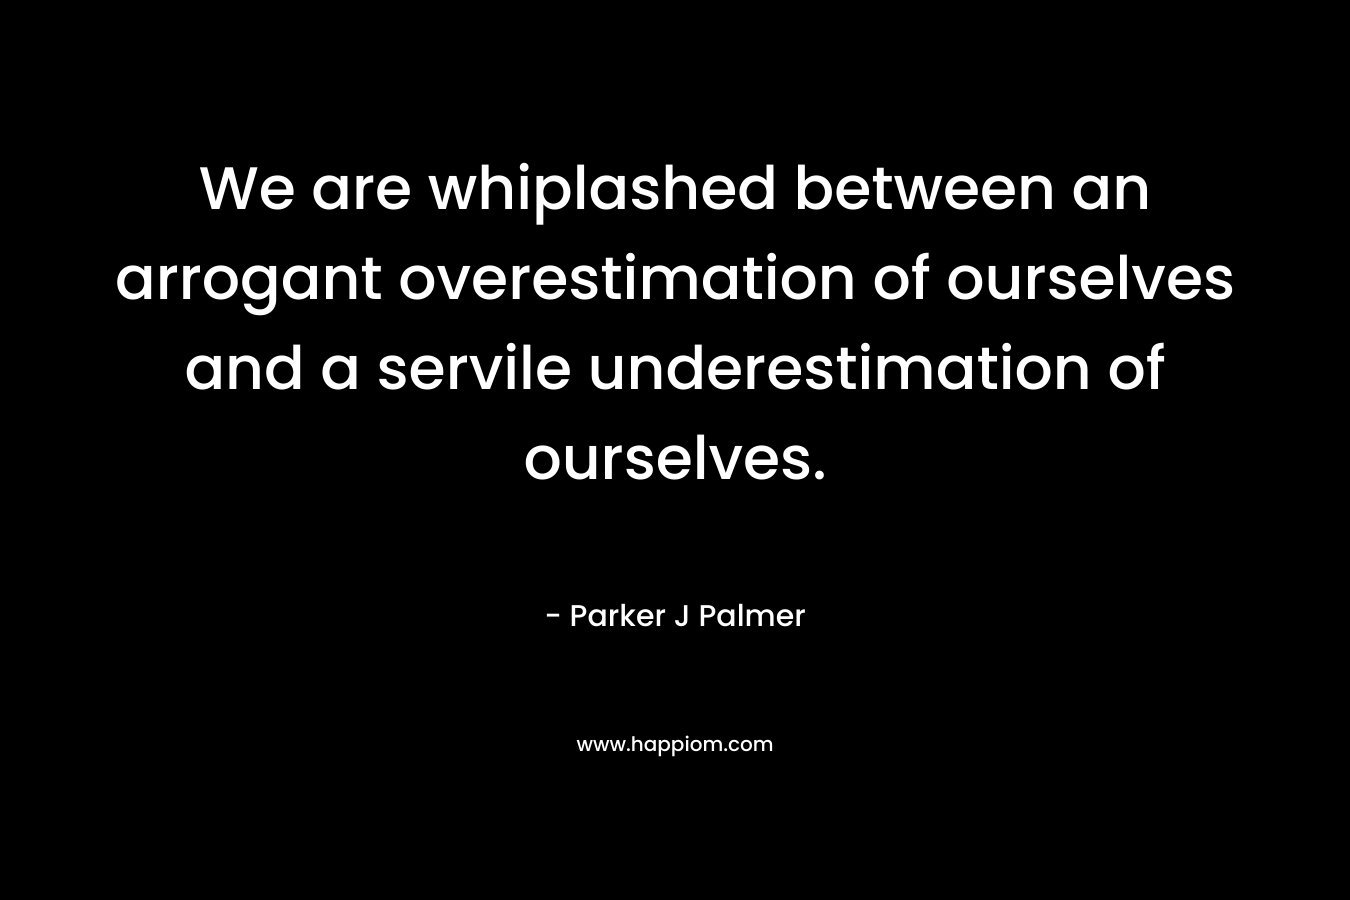 We are whiplashed between an arrogant overestimation of ourselves and a servile underestimation of ourselves.